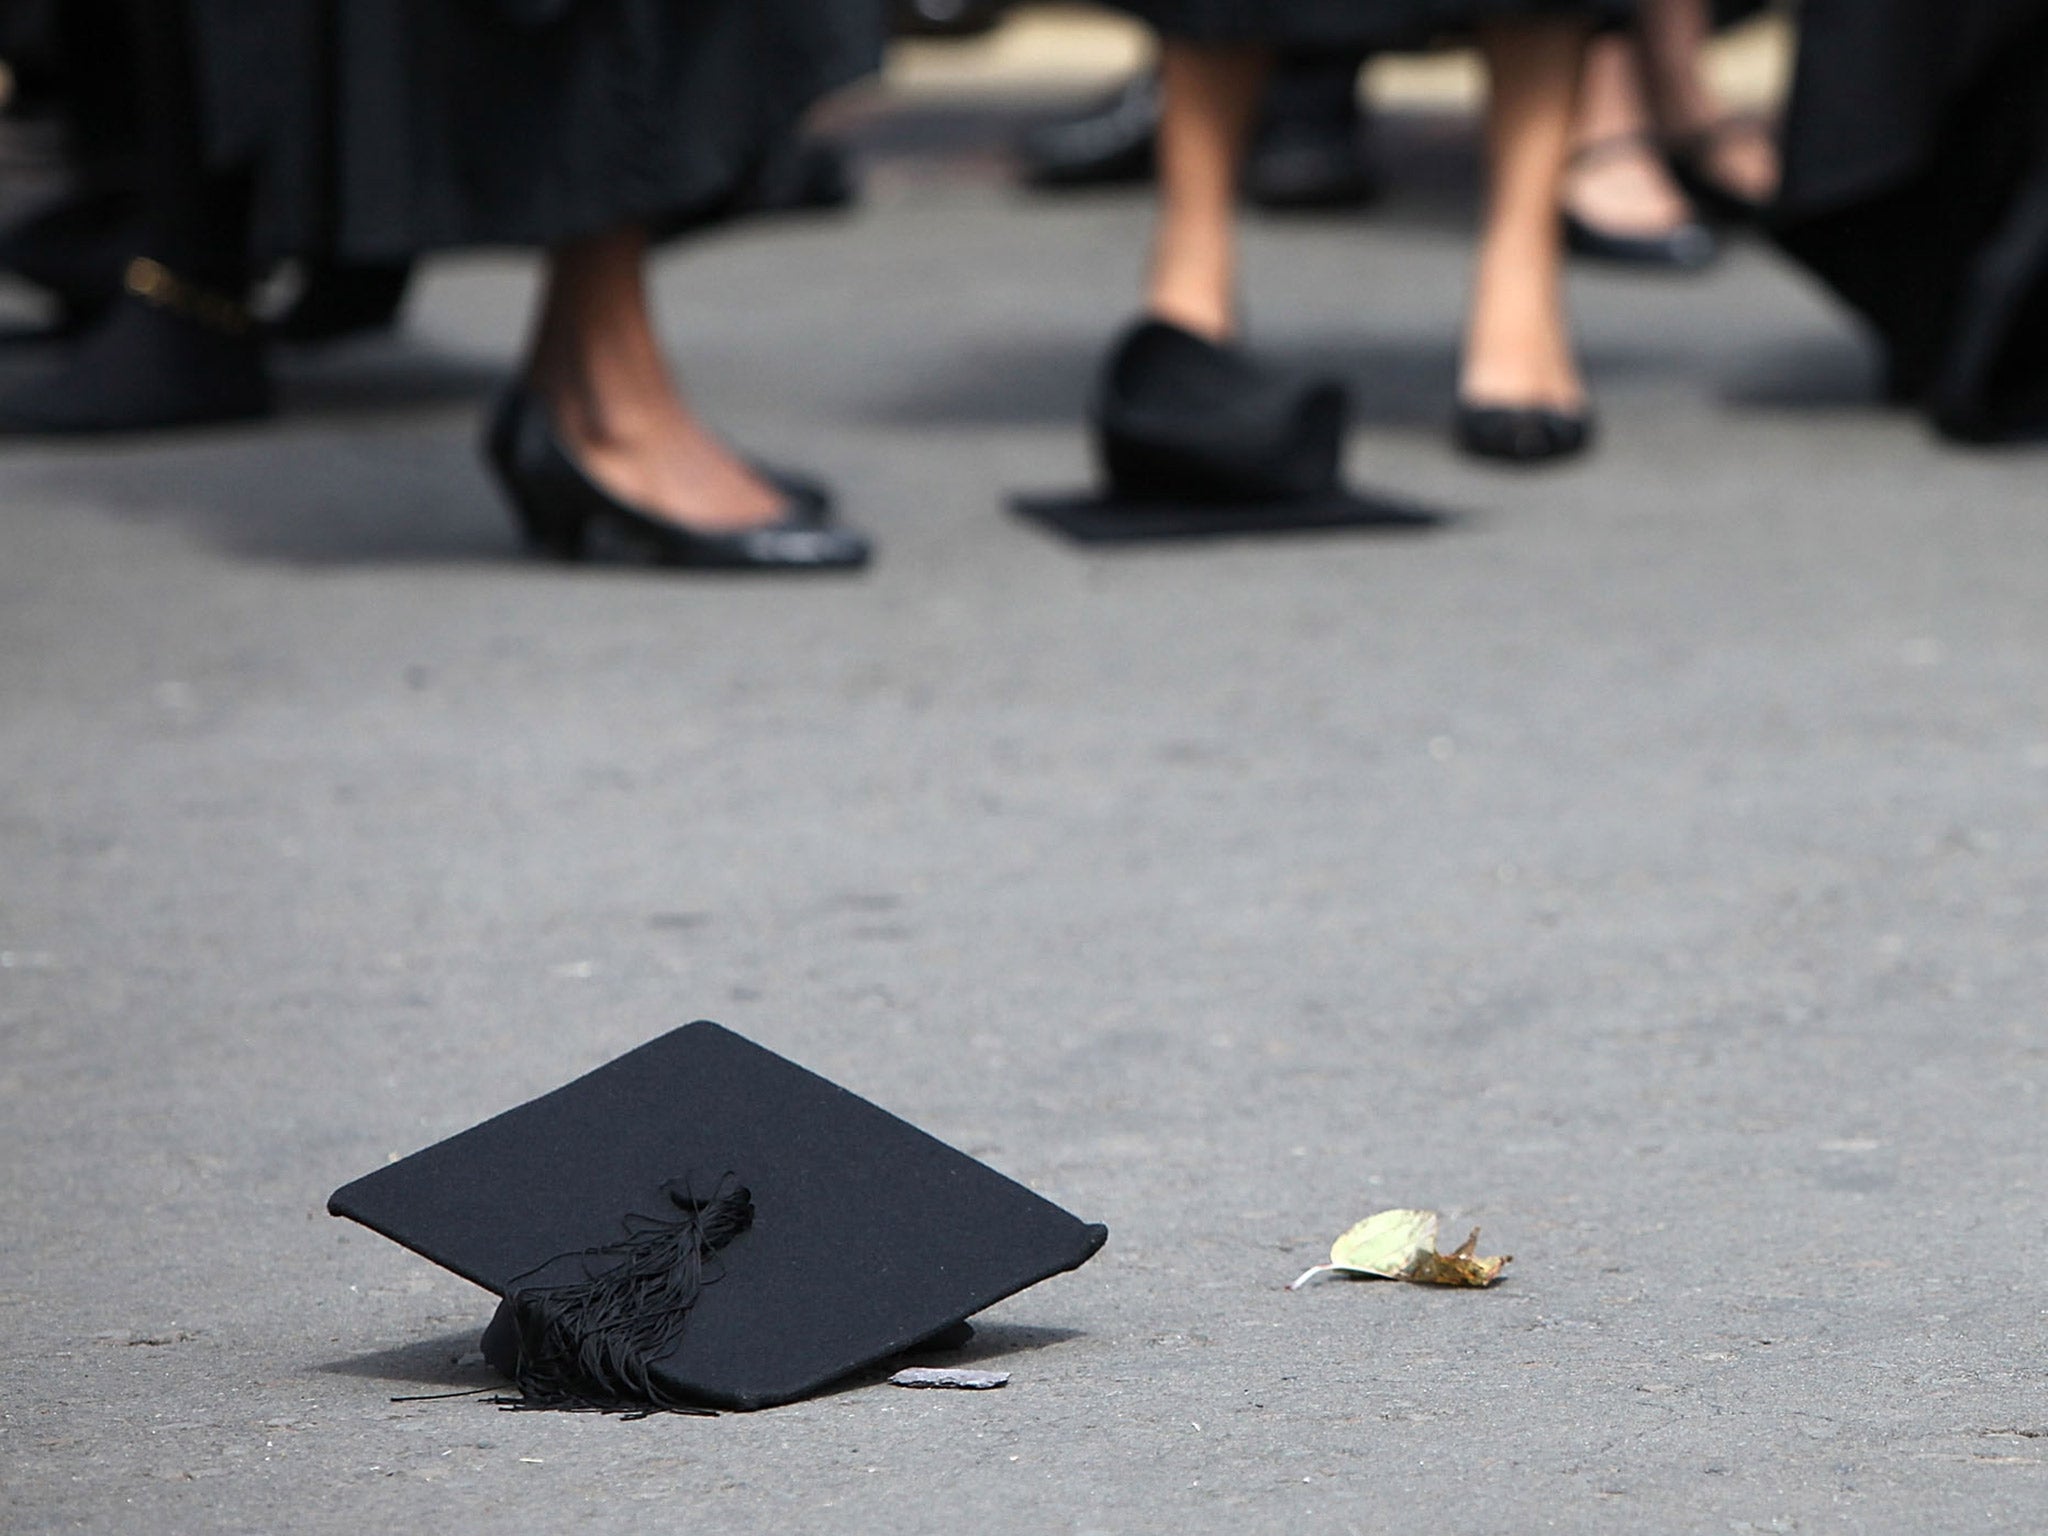 58.8 per cent of UK graduates have ended up in non-graduate jobs